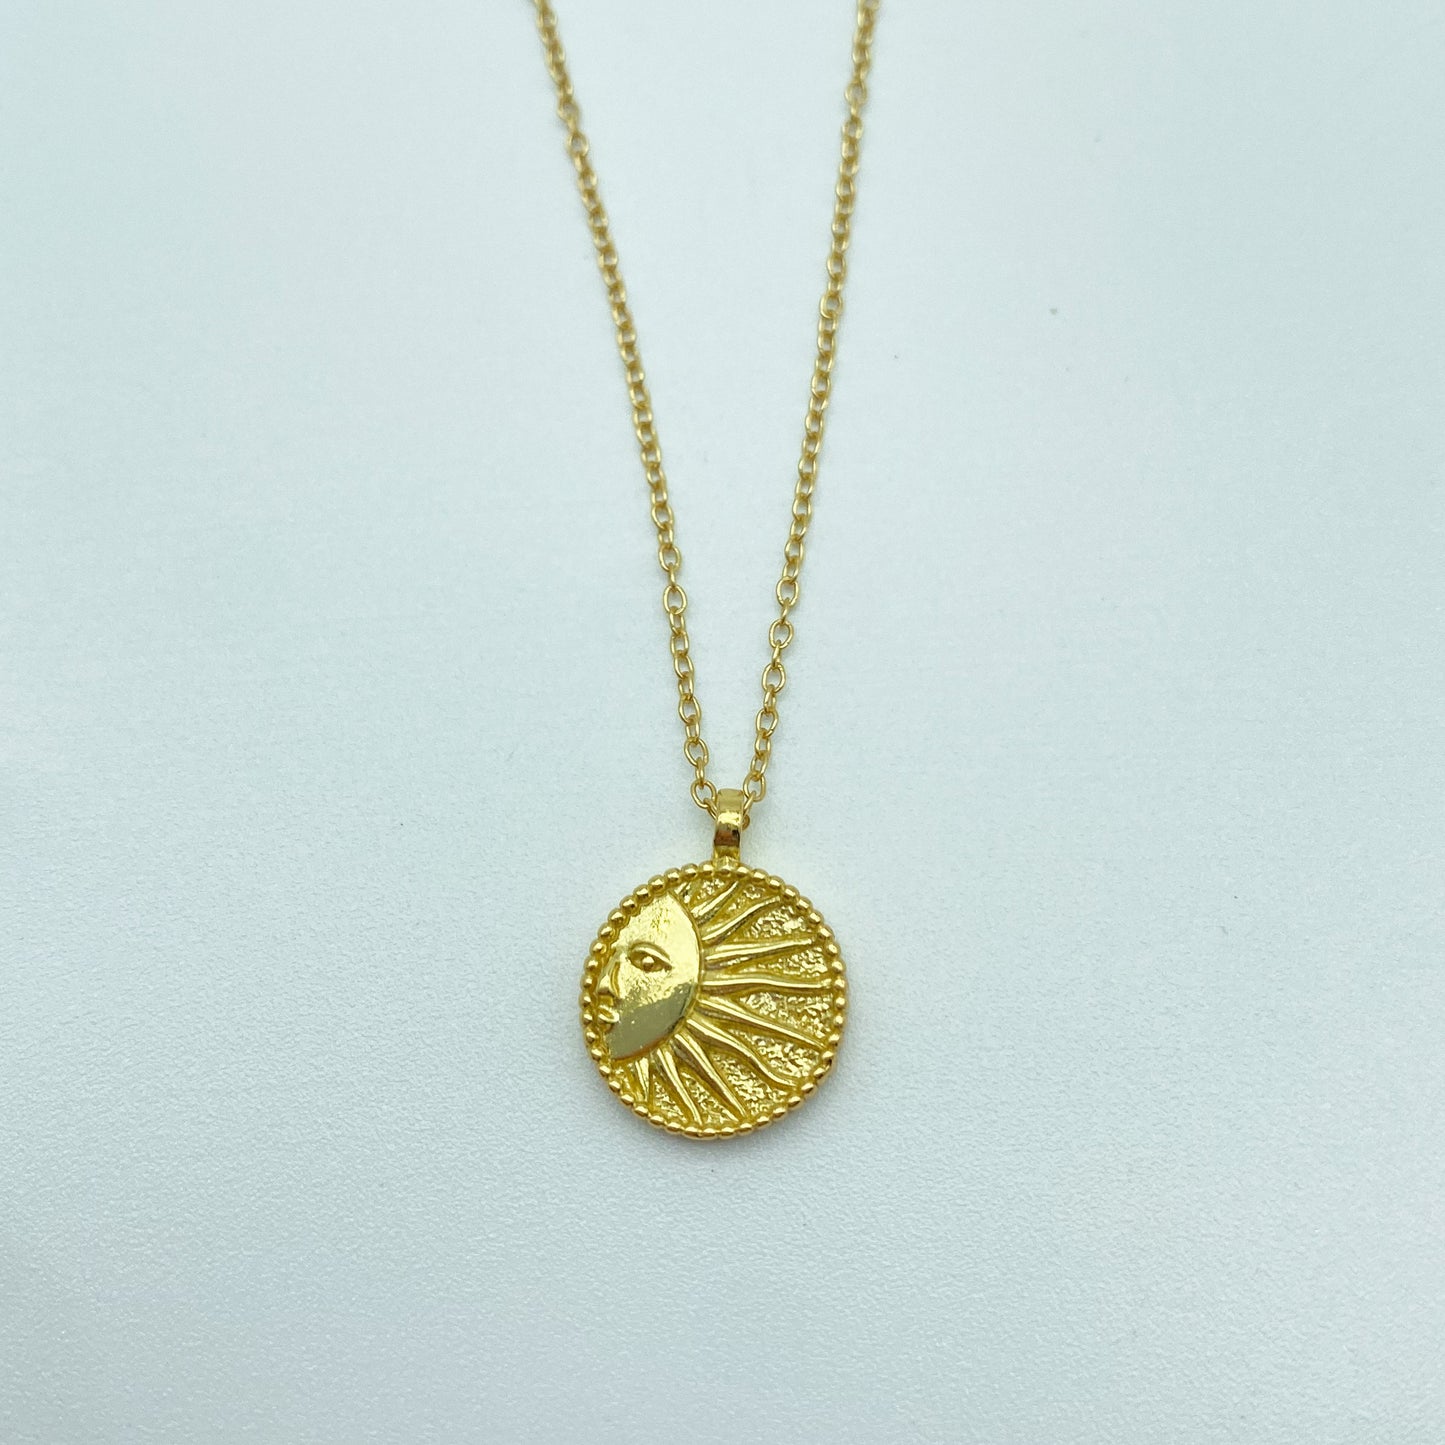 Eclipse necklace - gold